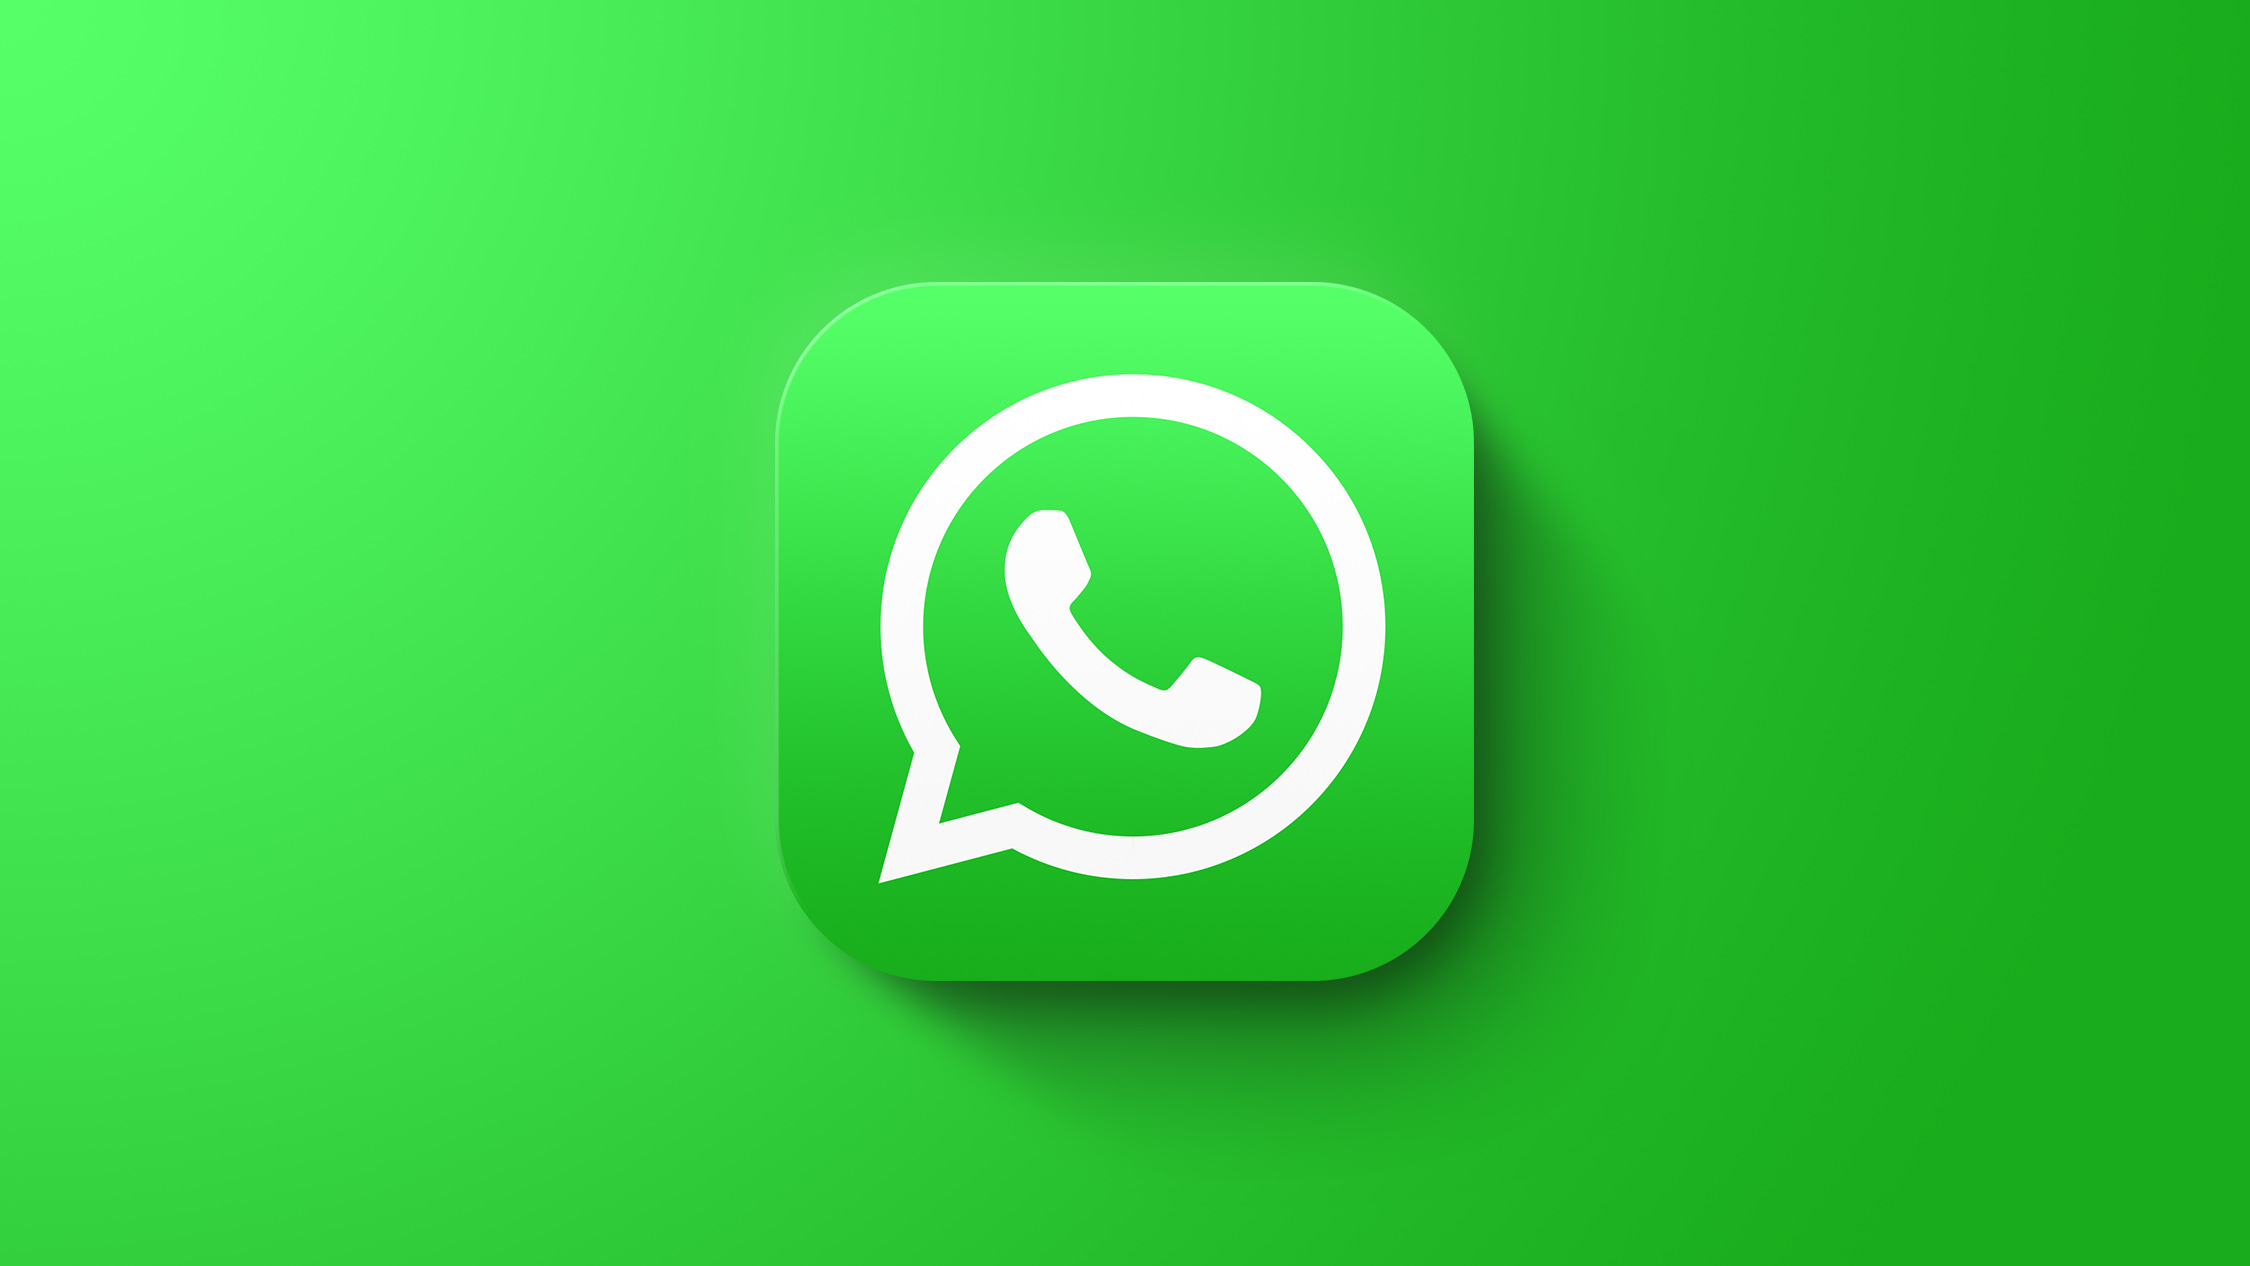 WhatsApp Chief Confirms iPad App is a Possibility: 'We'd Love to Do It'